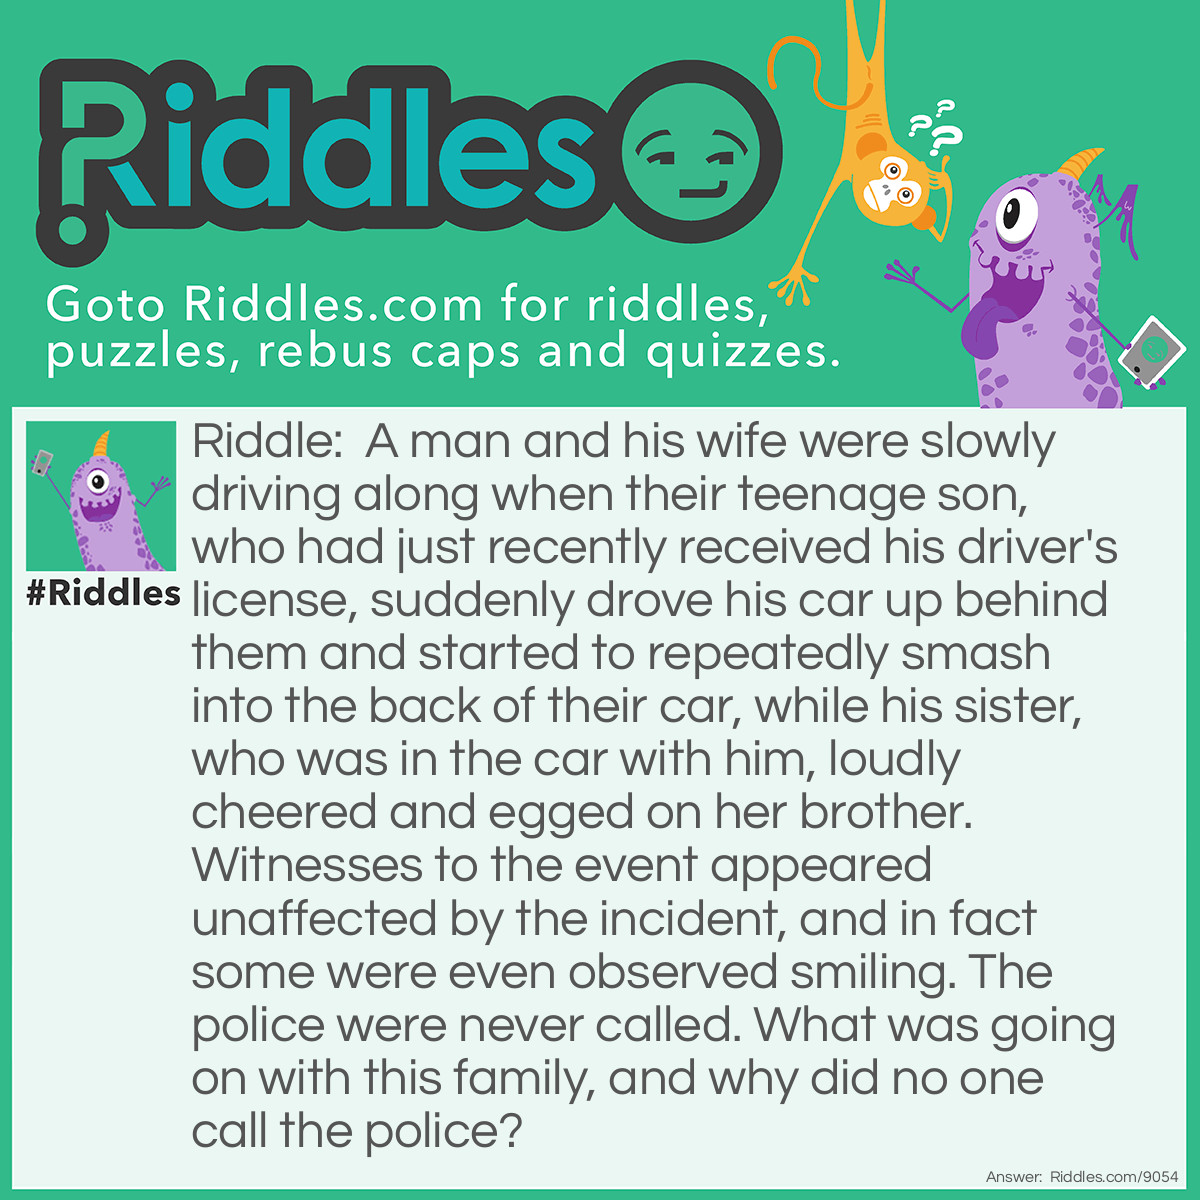 Riddle: A man and his wife were slowly driving along when their teenage son, who had just recently received his driver's license, suddenly drove his car up behind them and started to repeatedly smash into the back of their car, while his sister, who was in the car with him, loudly cheered and egged on her brother. Witnesses to the event appeared unaffected by the incident, and in fact some were even observed smiling. The police were never called. What was going on with this family, and why did no one call the police? Answer: The man and his wife had taken their two children to an amusement park. The parents were in one bumper car, and their two children were in another bumper car.